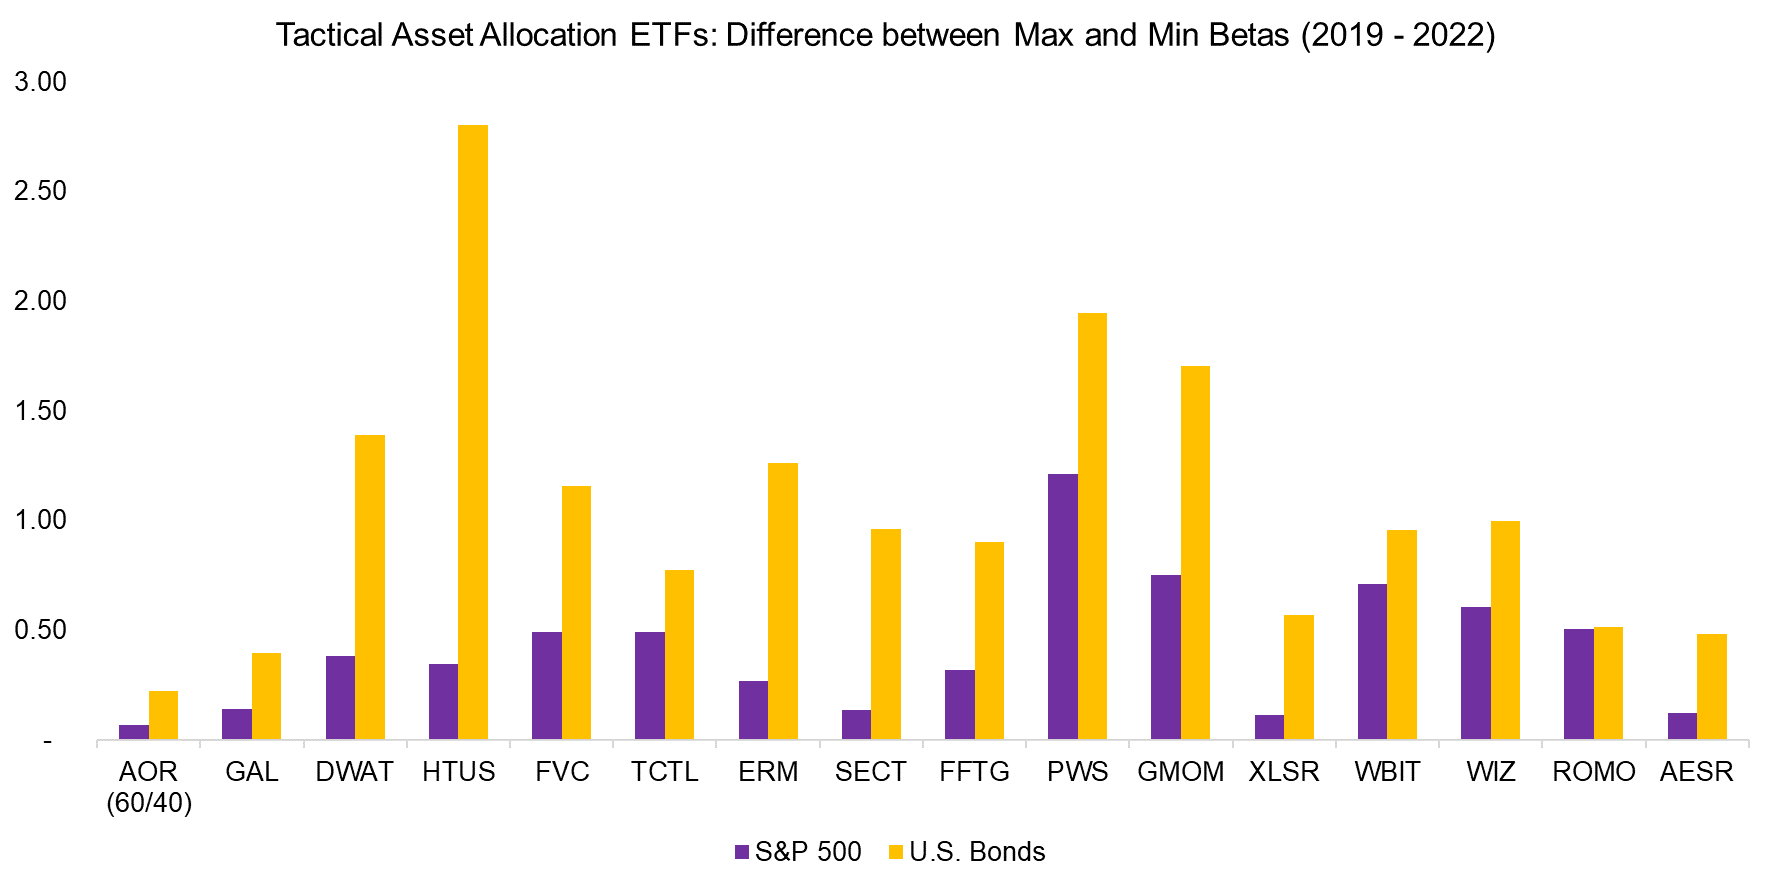 Tactical Asset Allocation ETFs Difference between Max and Min Betas (2019 - 2022)